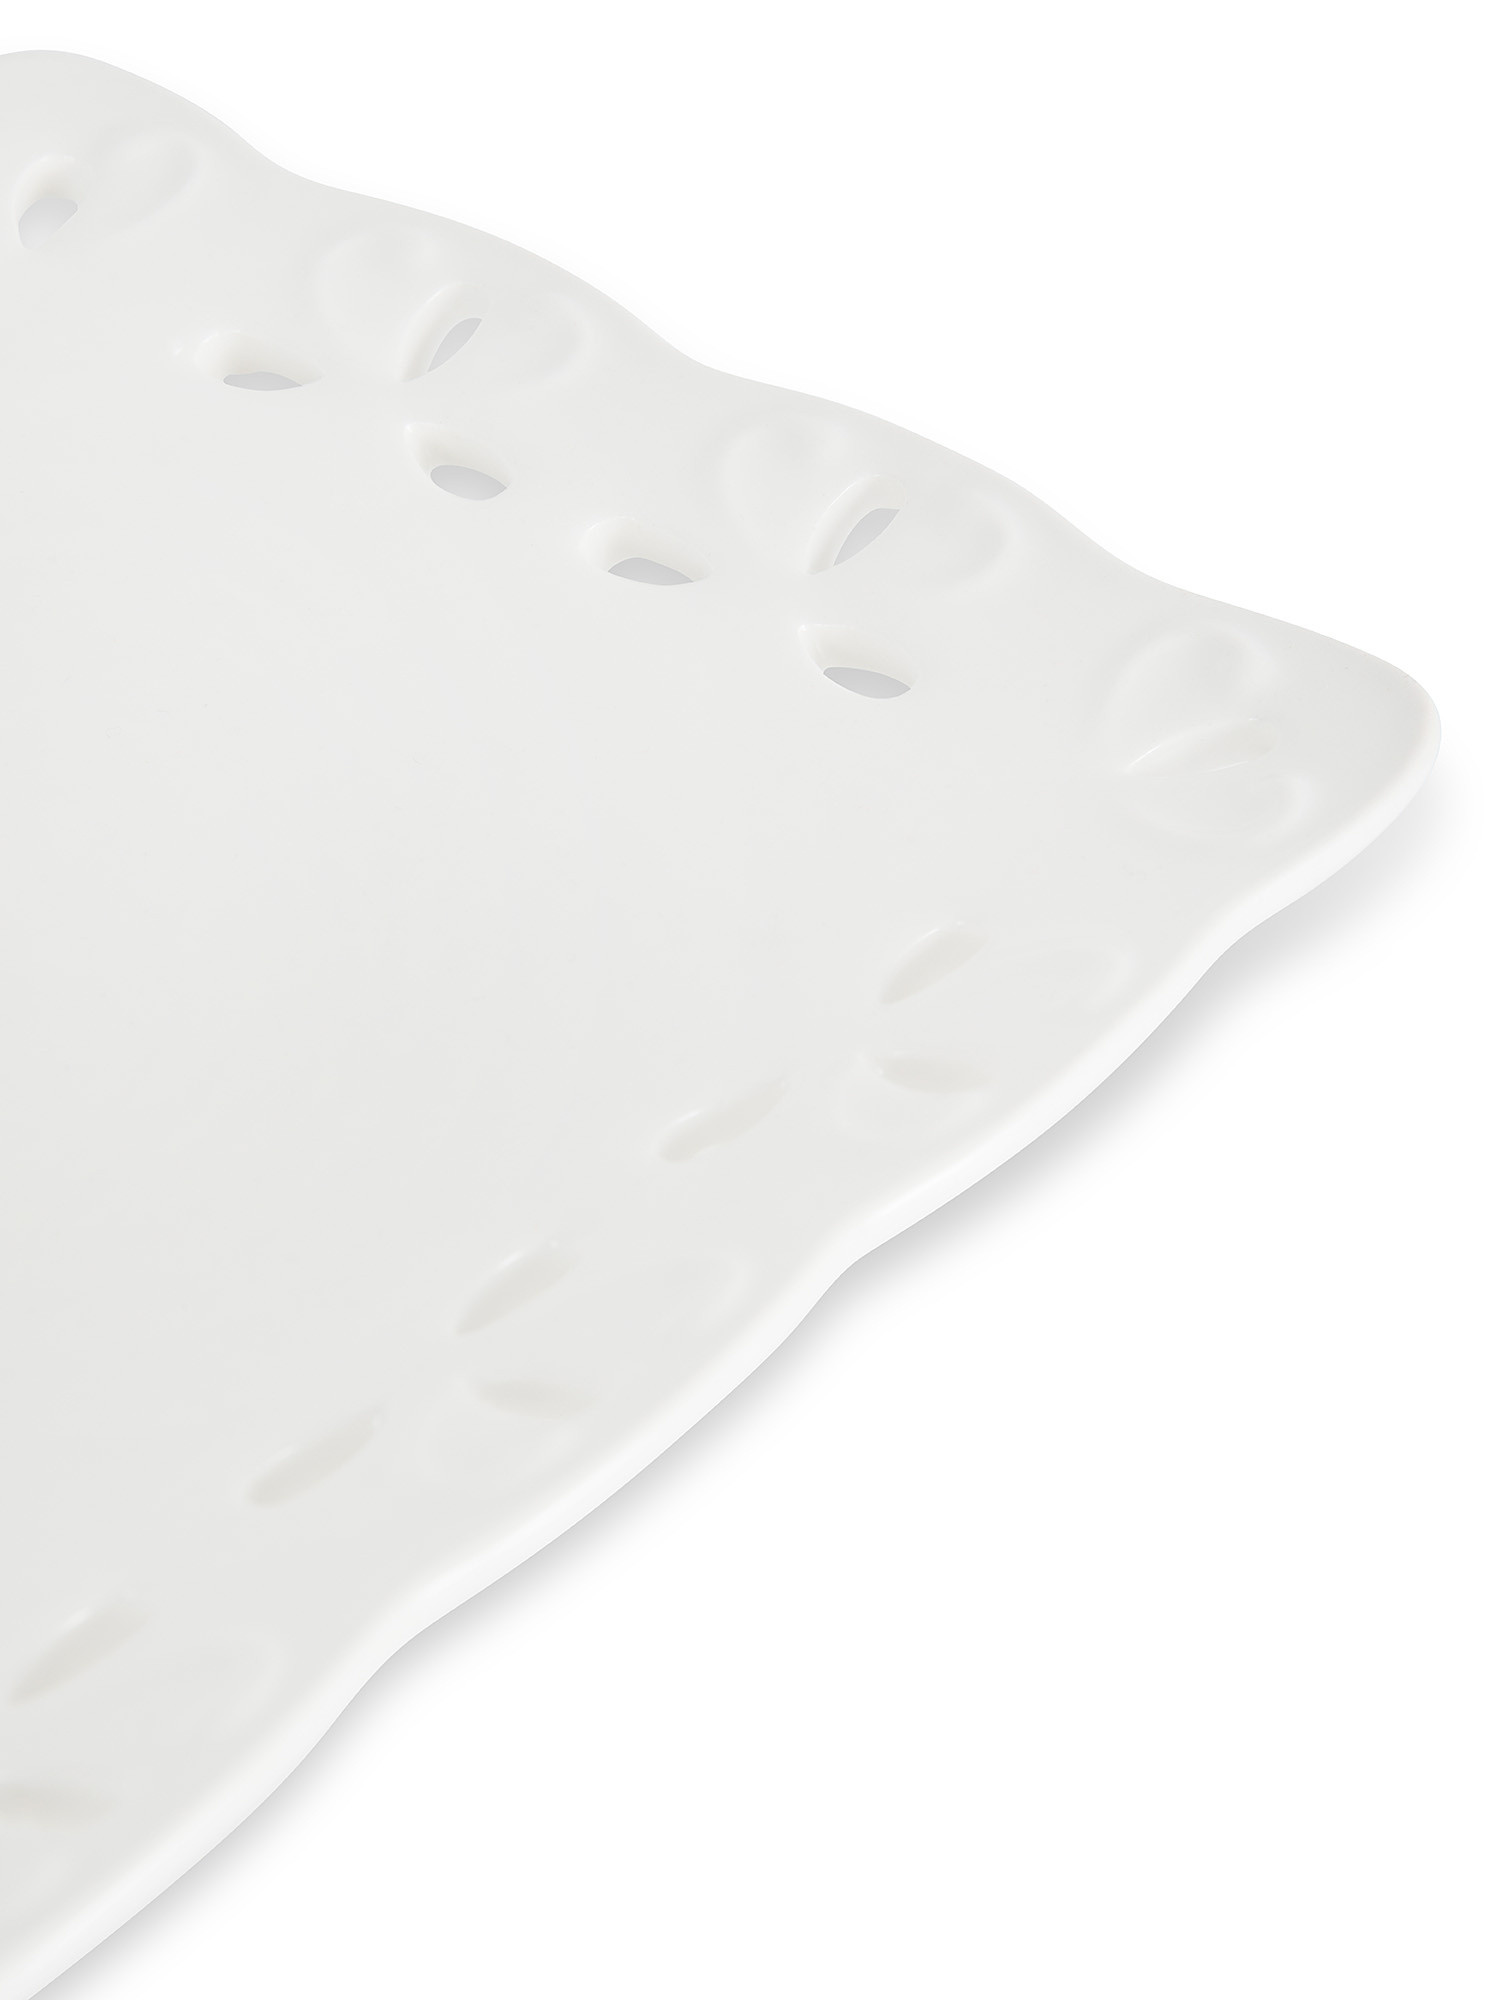 Ceramic tray with perforated edge, White, large image number 1